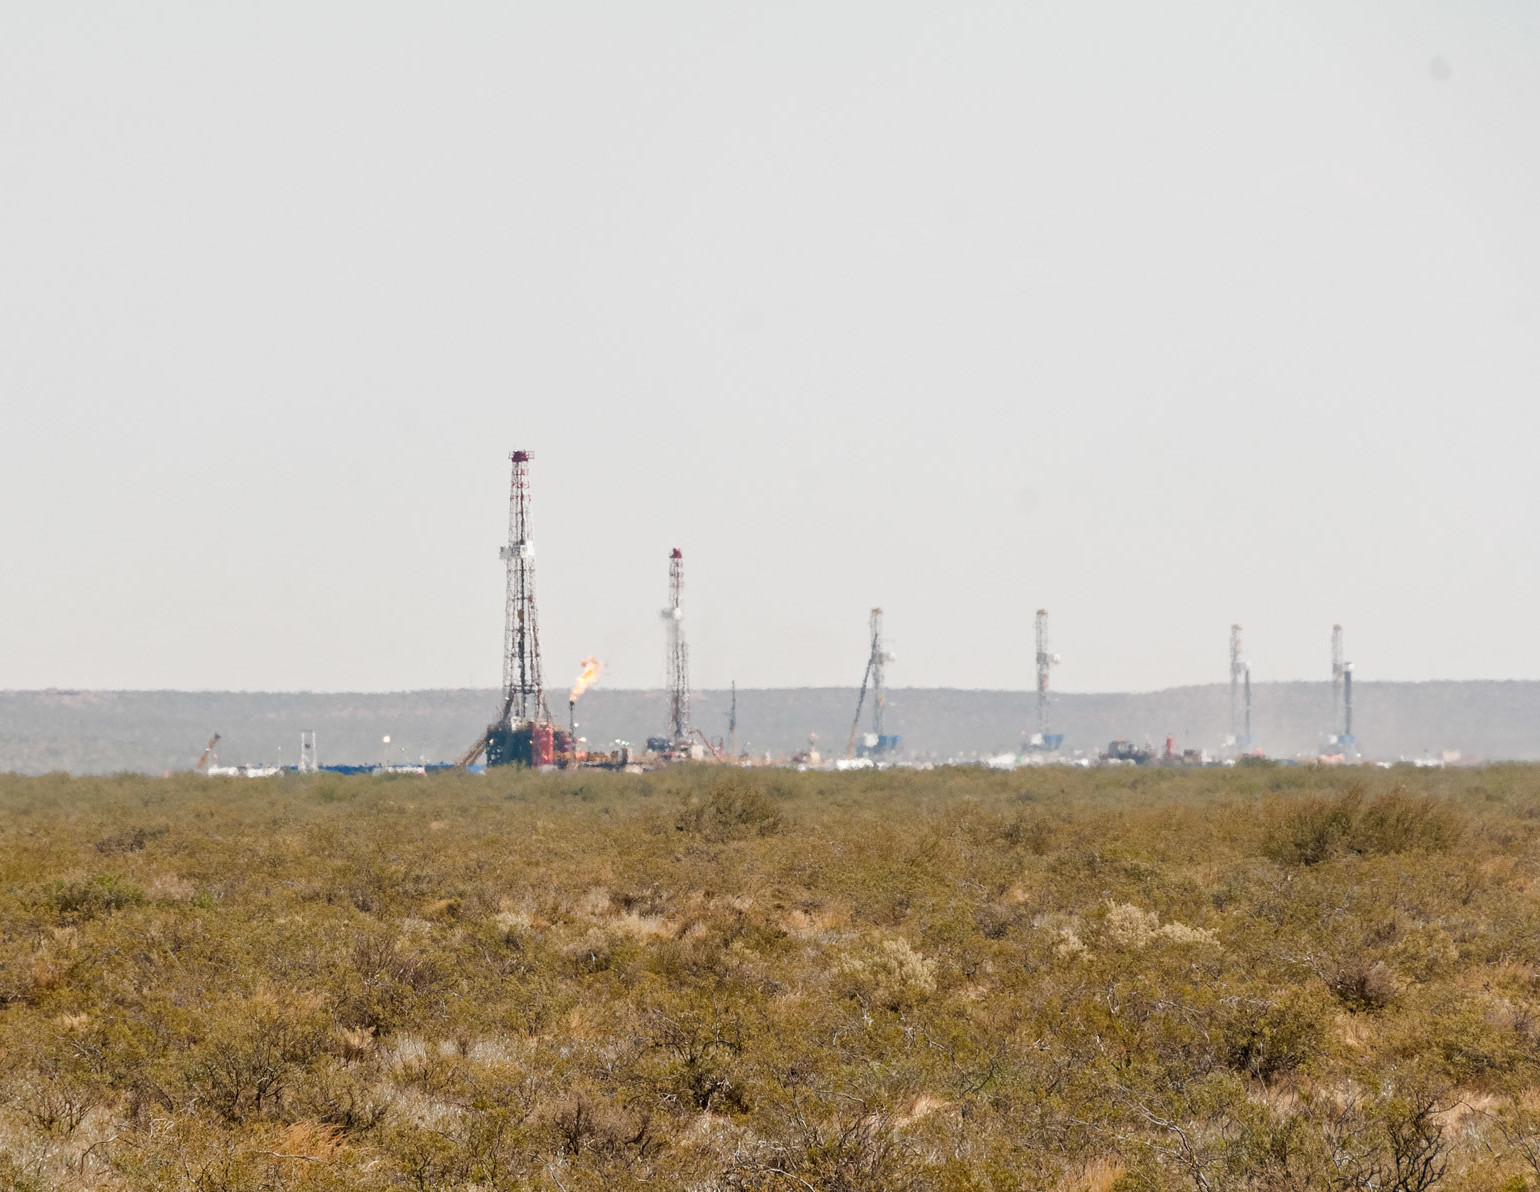 Green-yellow grassy field in front of a row of oil drills, Vaca Muerta Argentina